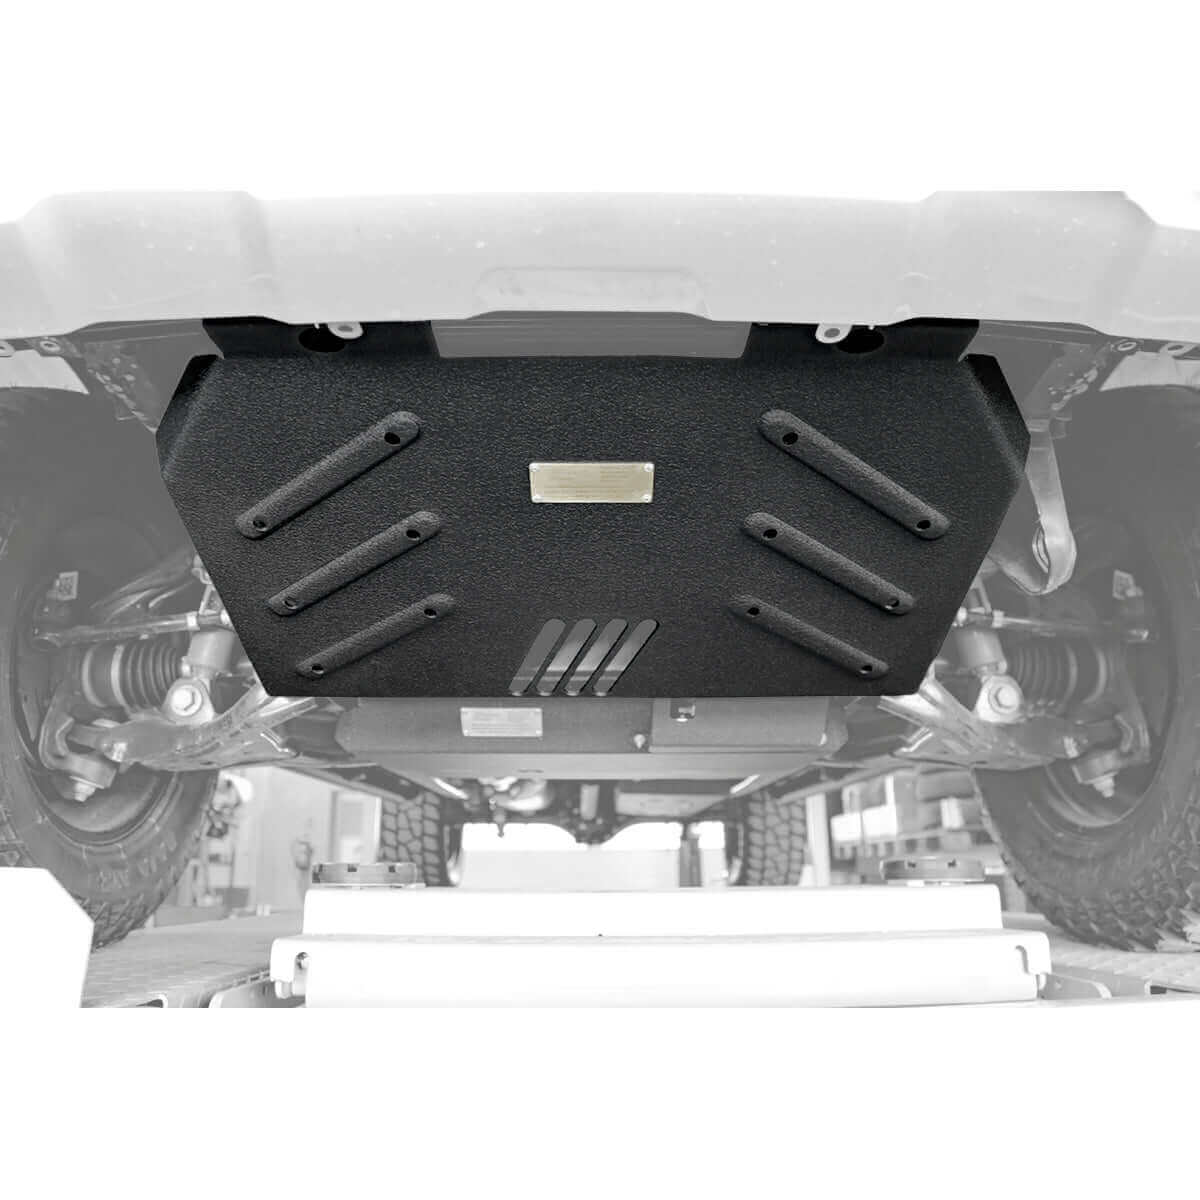 Skid plate set Ford Ranger year 2019 - 2022 6 pieces.